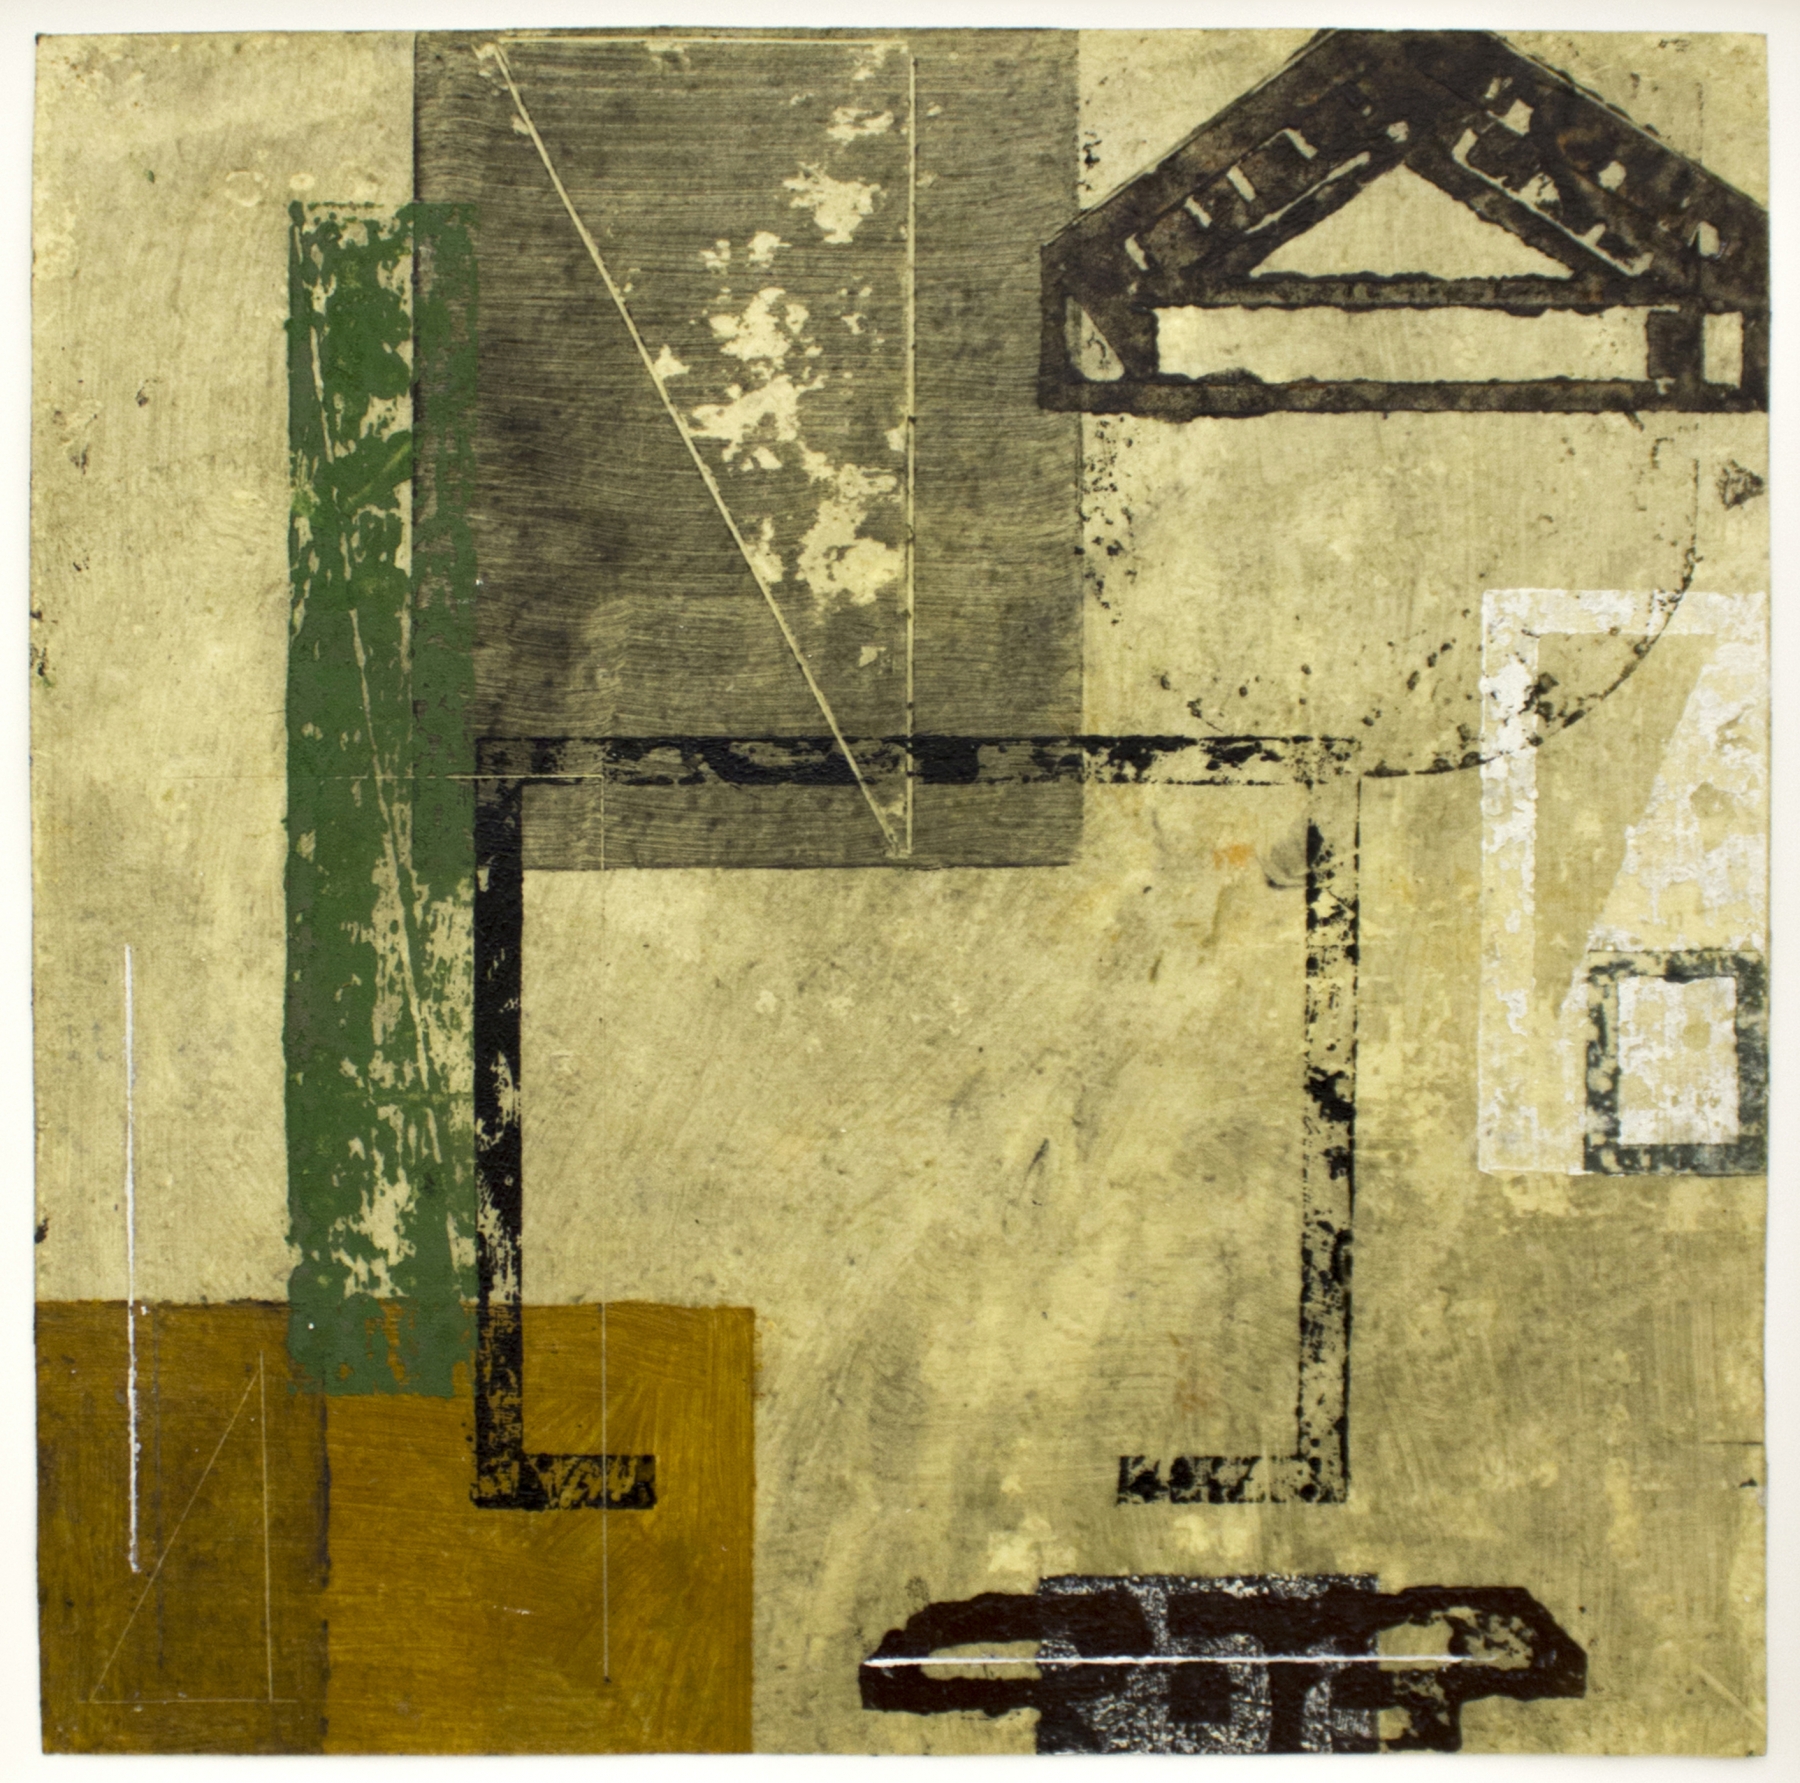 David Rabinowitch
Untitled (P&amp;eacute;rigord Construction of Vision), 2013
Wax, graphite, oil and oil based ink on paper
19 x 19 inches (48.3 x 48.3 cm)
DR13-03

Inquire
&amp;nbsp;